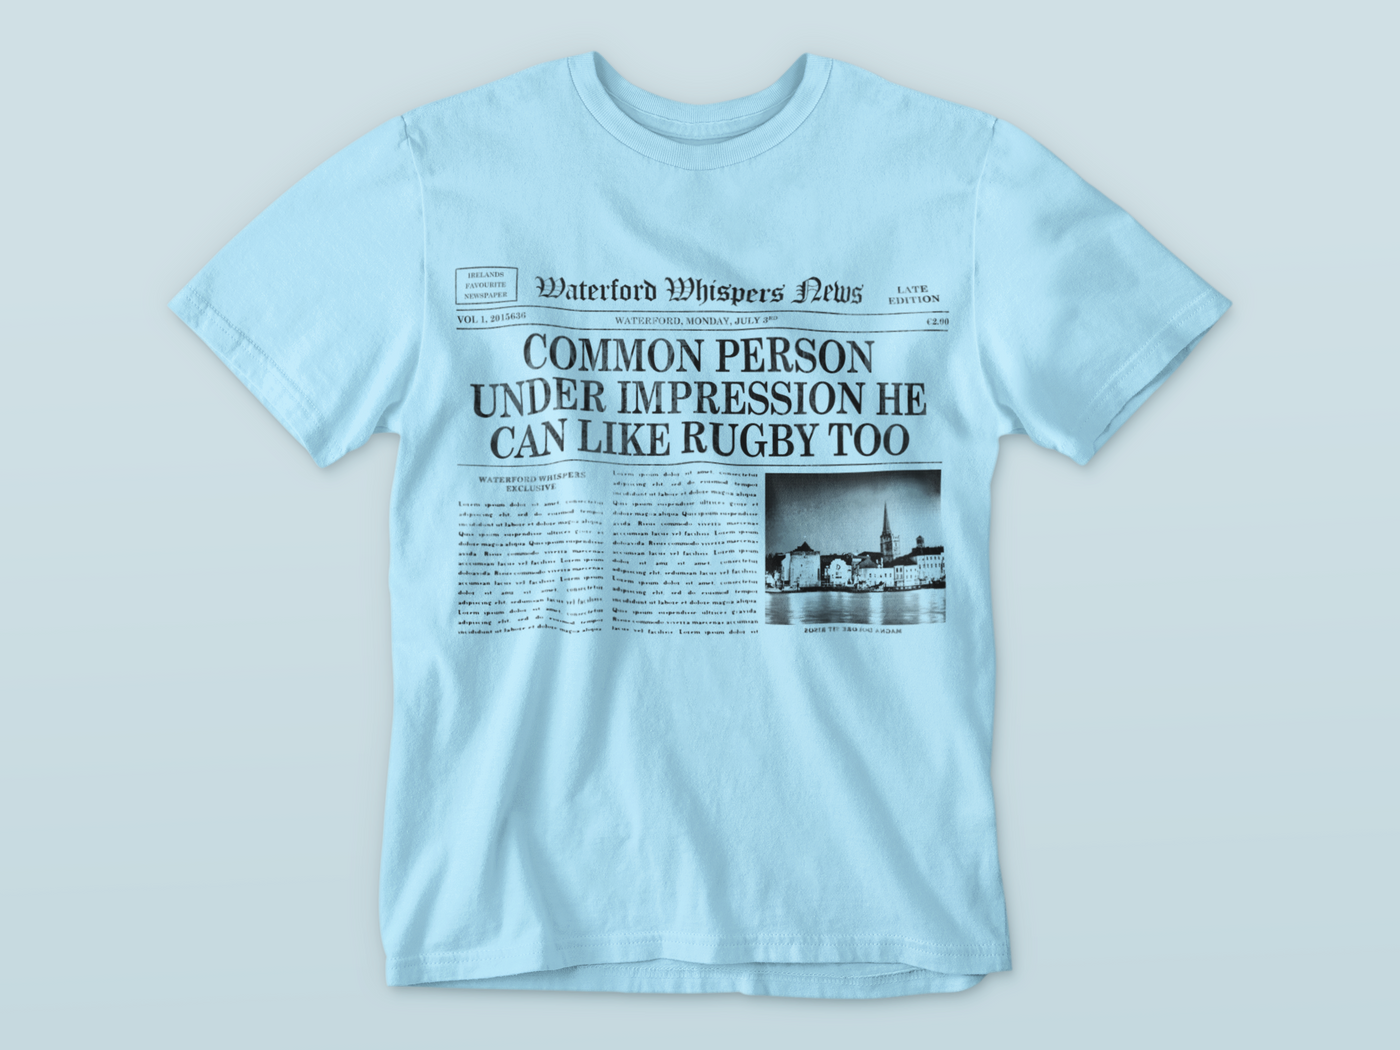 Common Person Under Impression He Can Like Rugby Too - Premium WWN Headline T-shirt